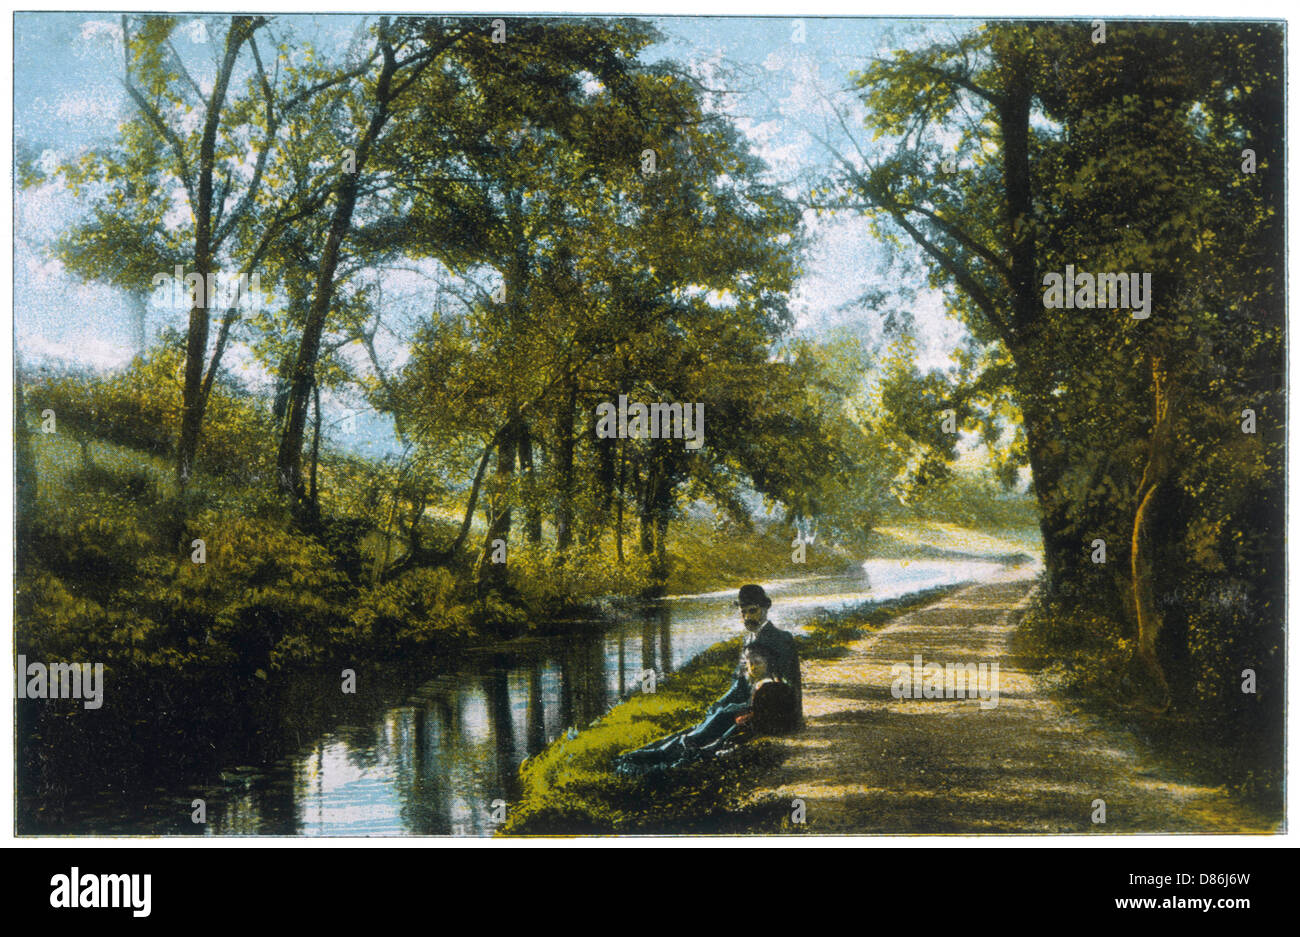 George Eliot Cov Canal Stock Photo